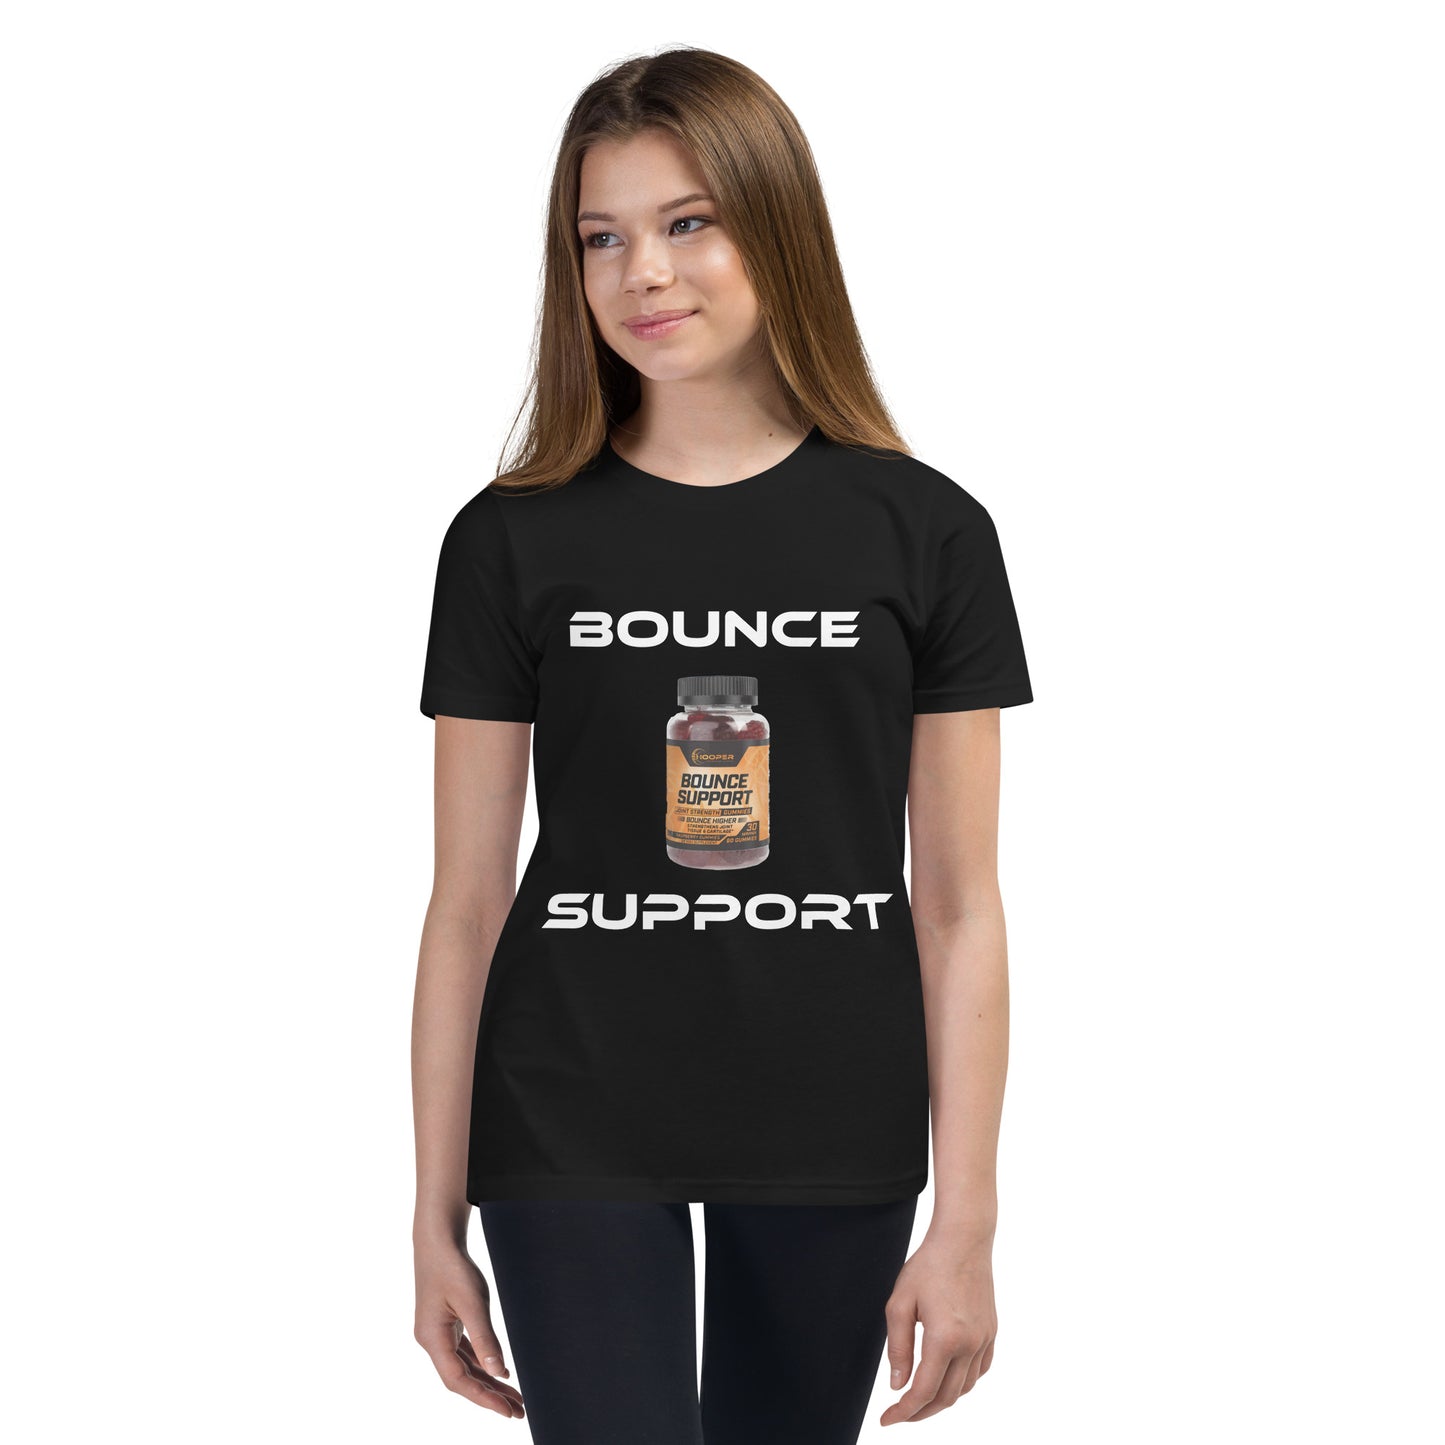 Bounce Support Youth Short Sleeve T-Shirt-Fashionable and Cozy Kids' Tee